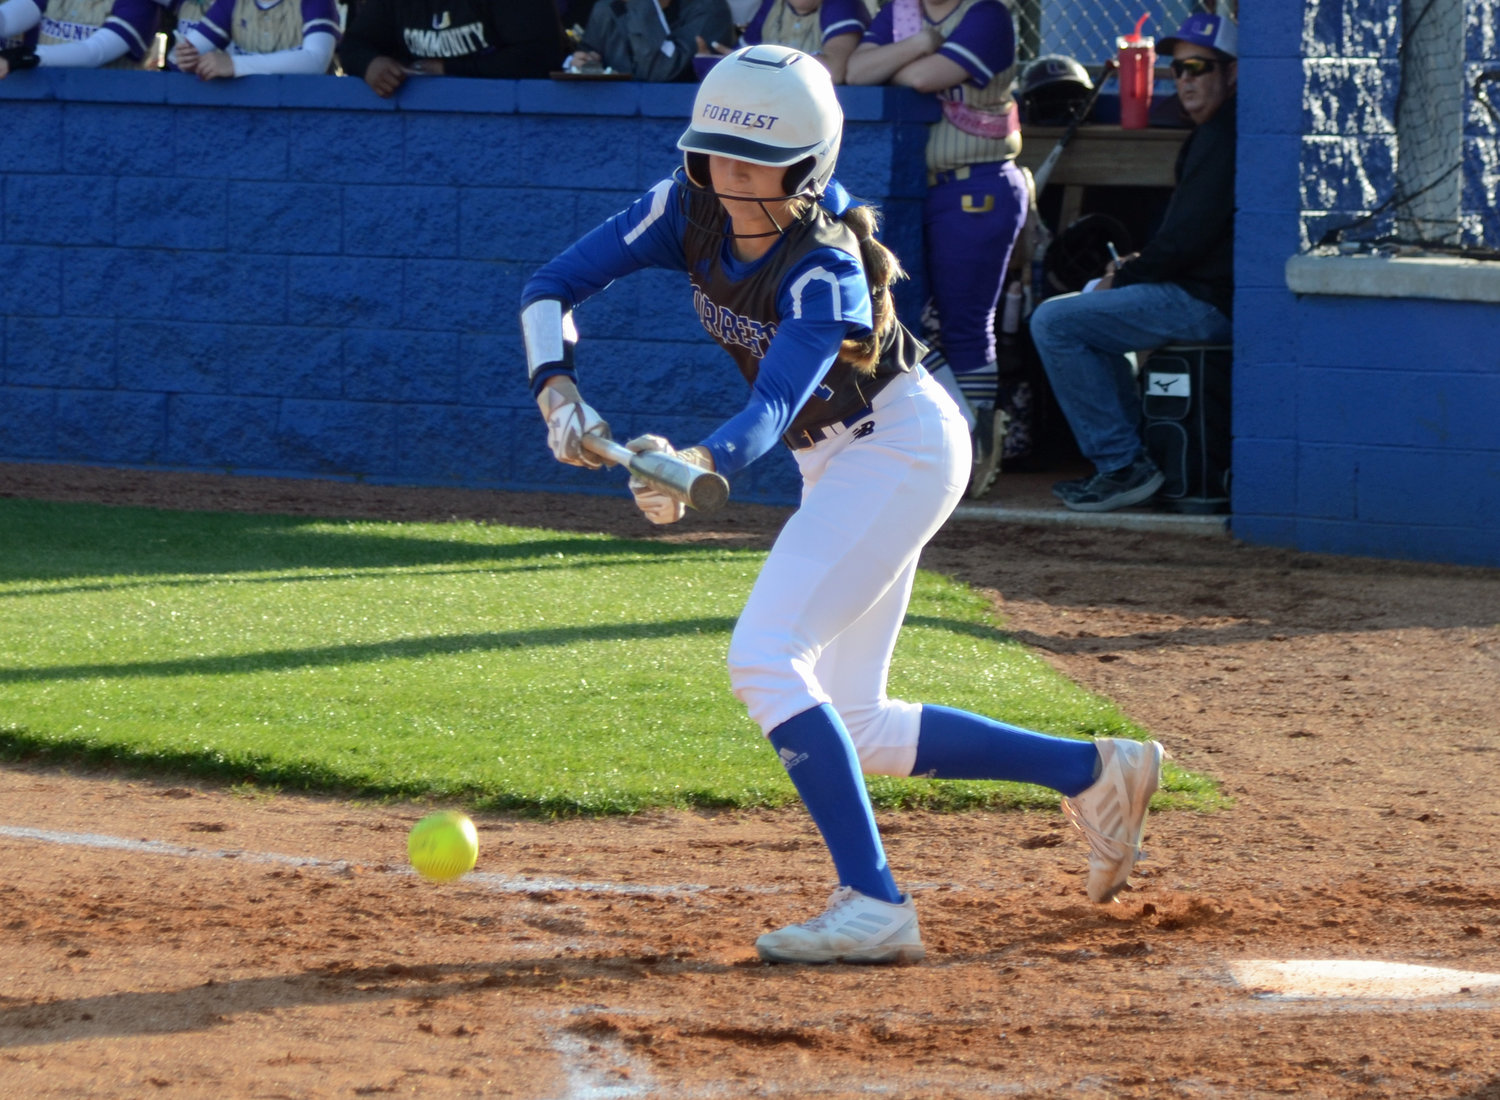 Addison Bunty went 2-for-3 with an RBI and run scored for the back-to-back defending state champion Lady Rockets.